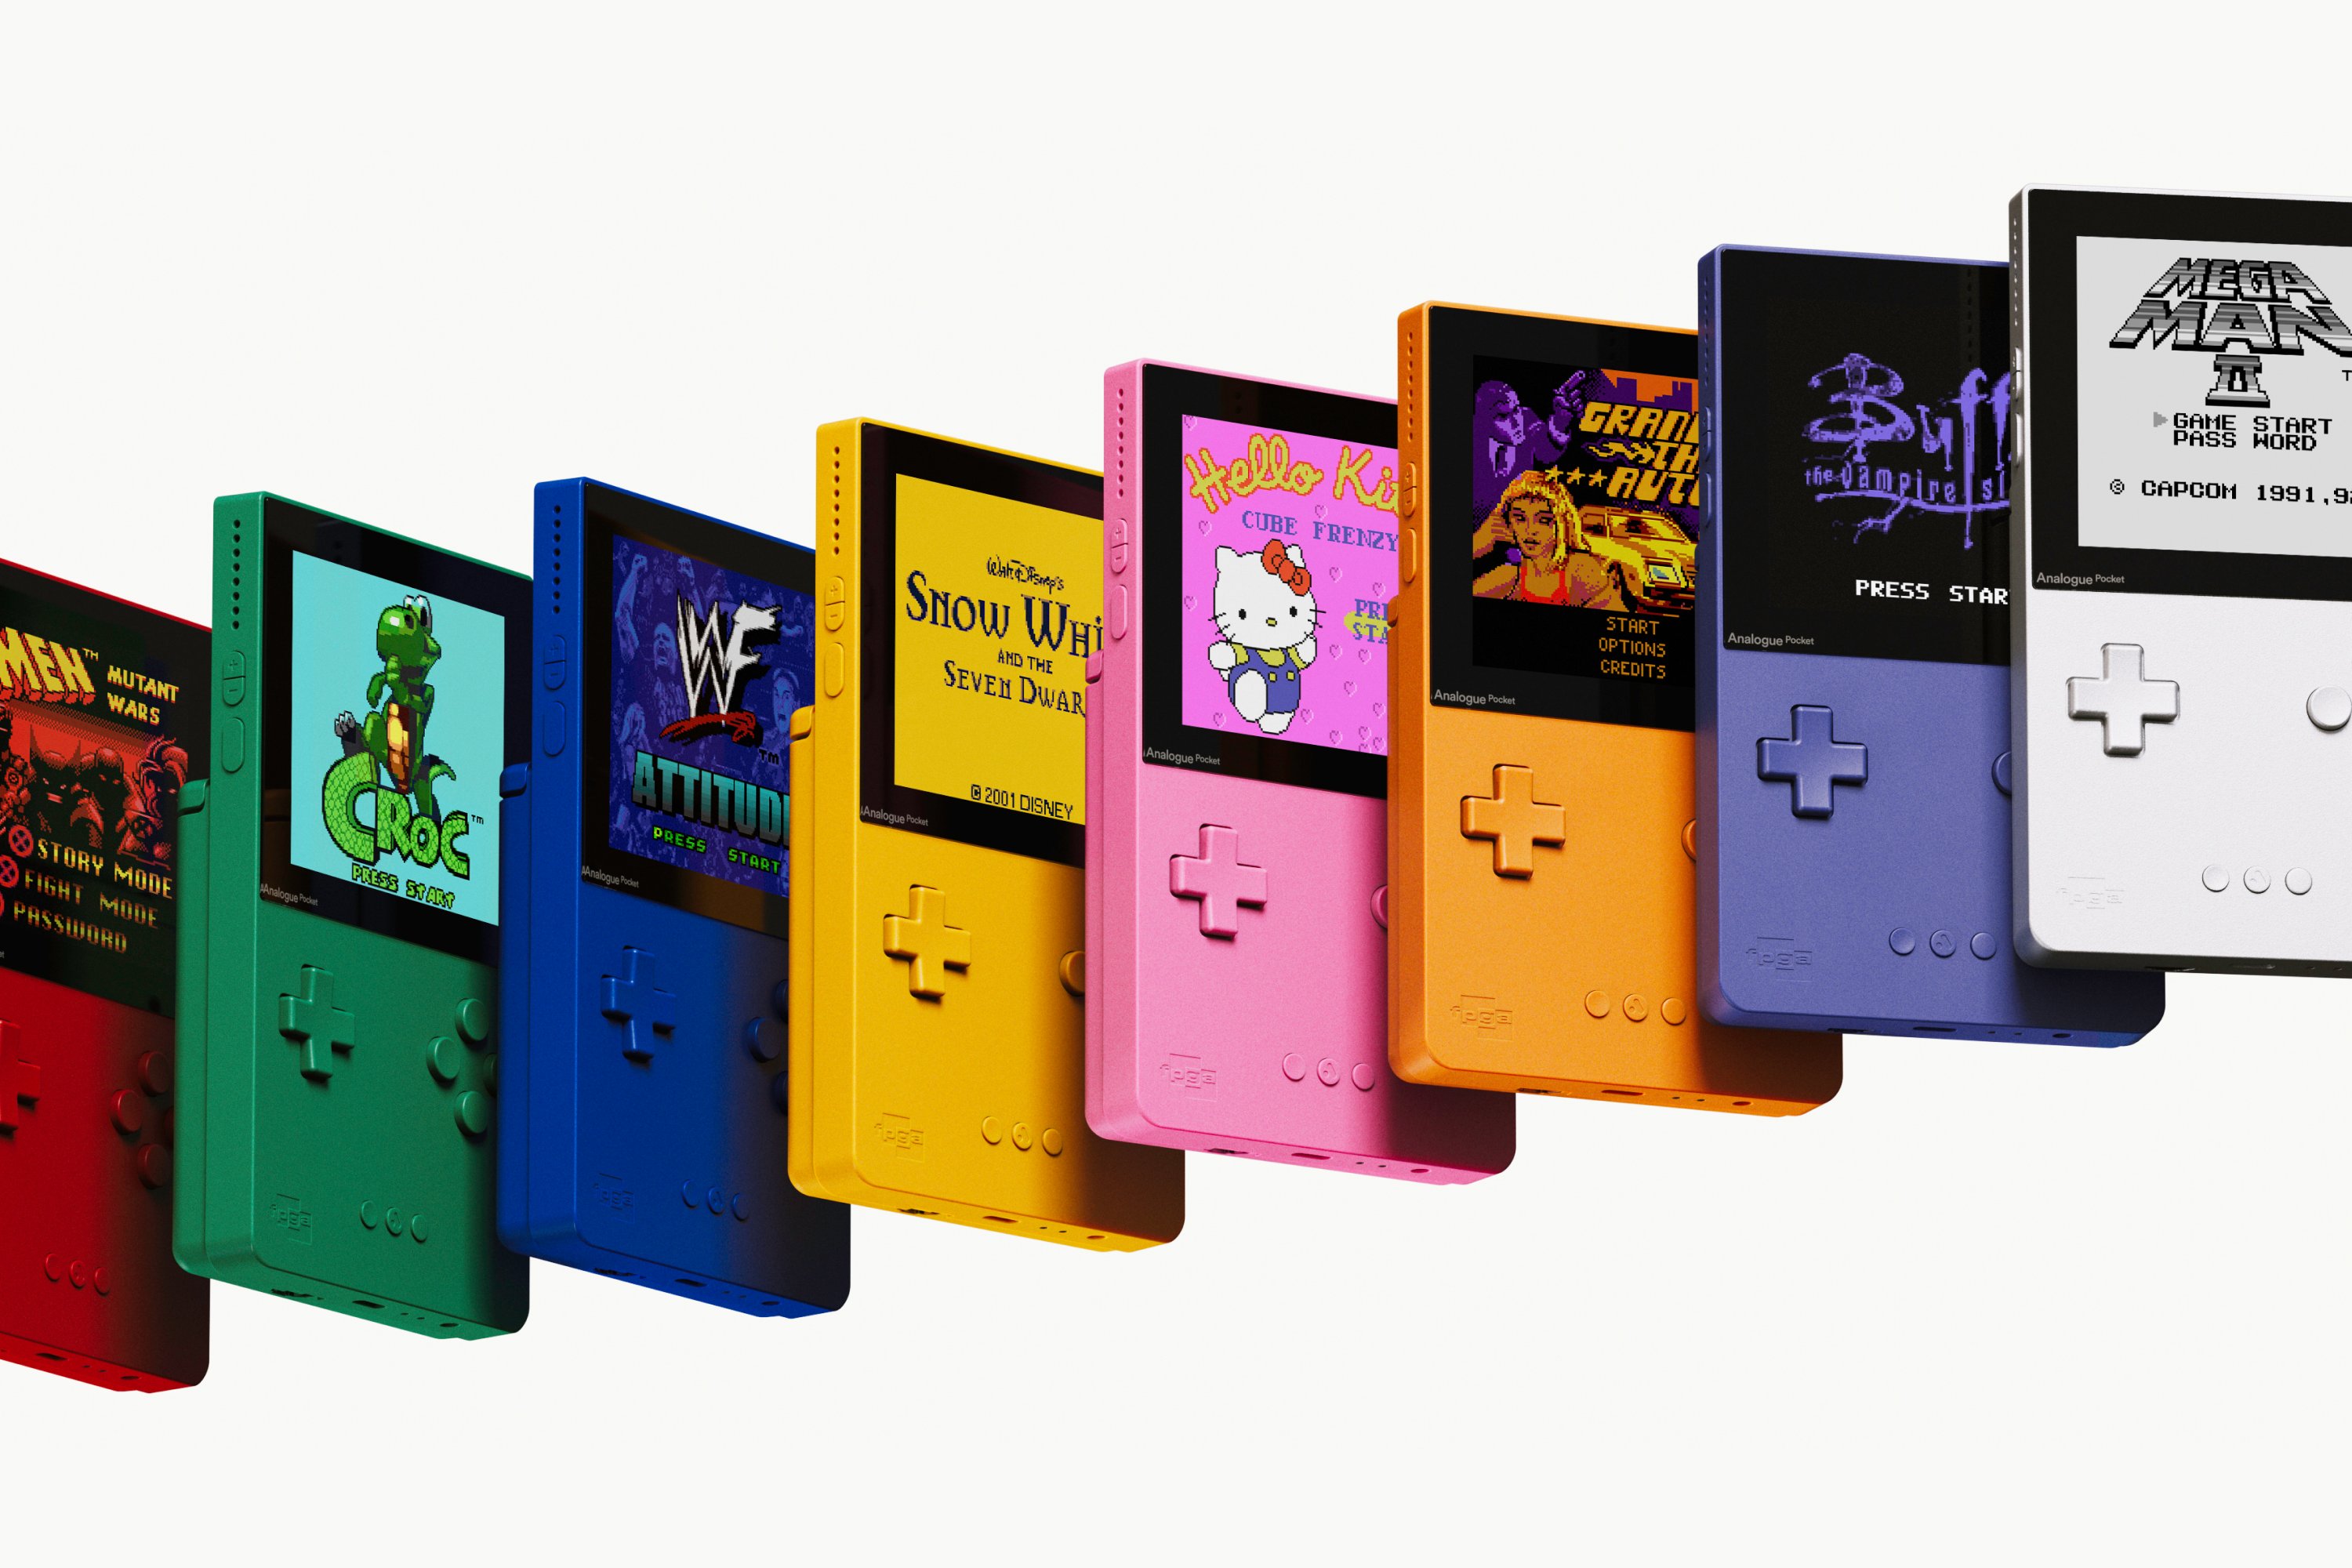 Analogue Pocket - Classic Limited Editions available on Nov 17th, 8 AM PT.  $249.99. Ships Nov 20th